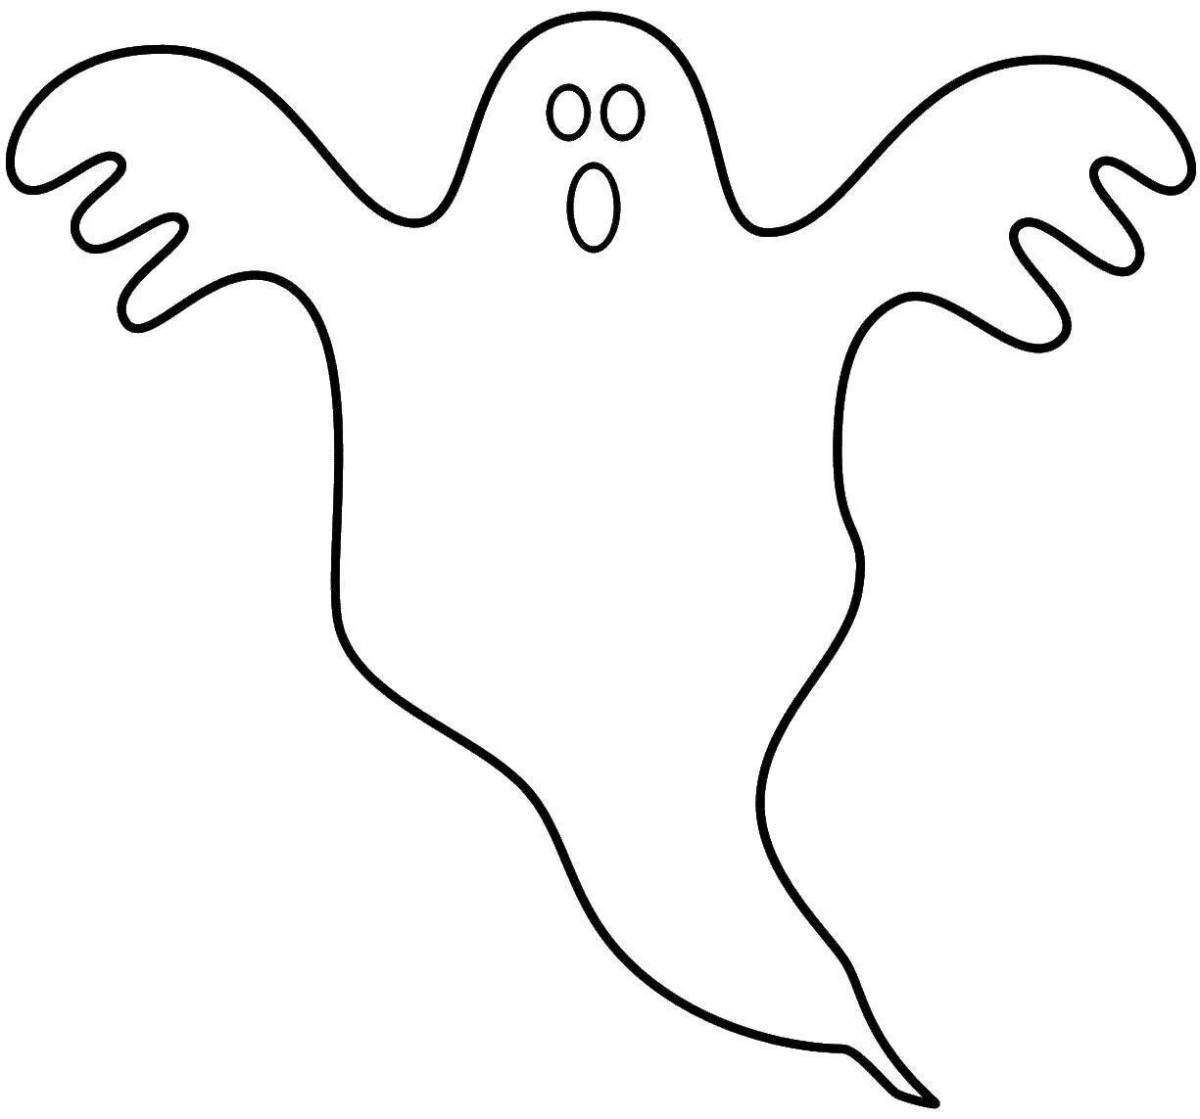 Grim ghost coloring page